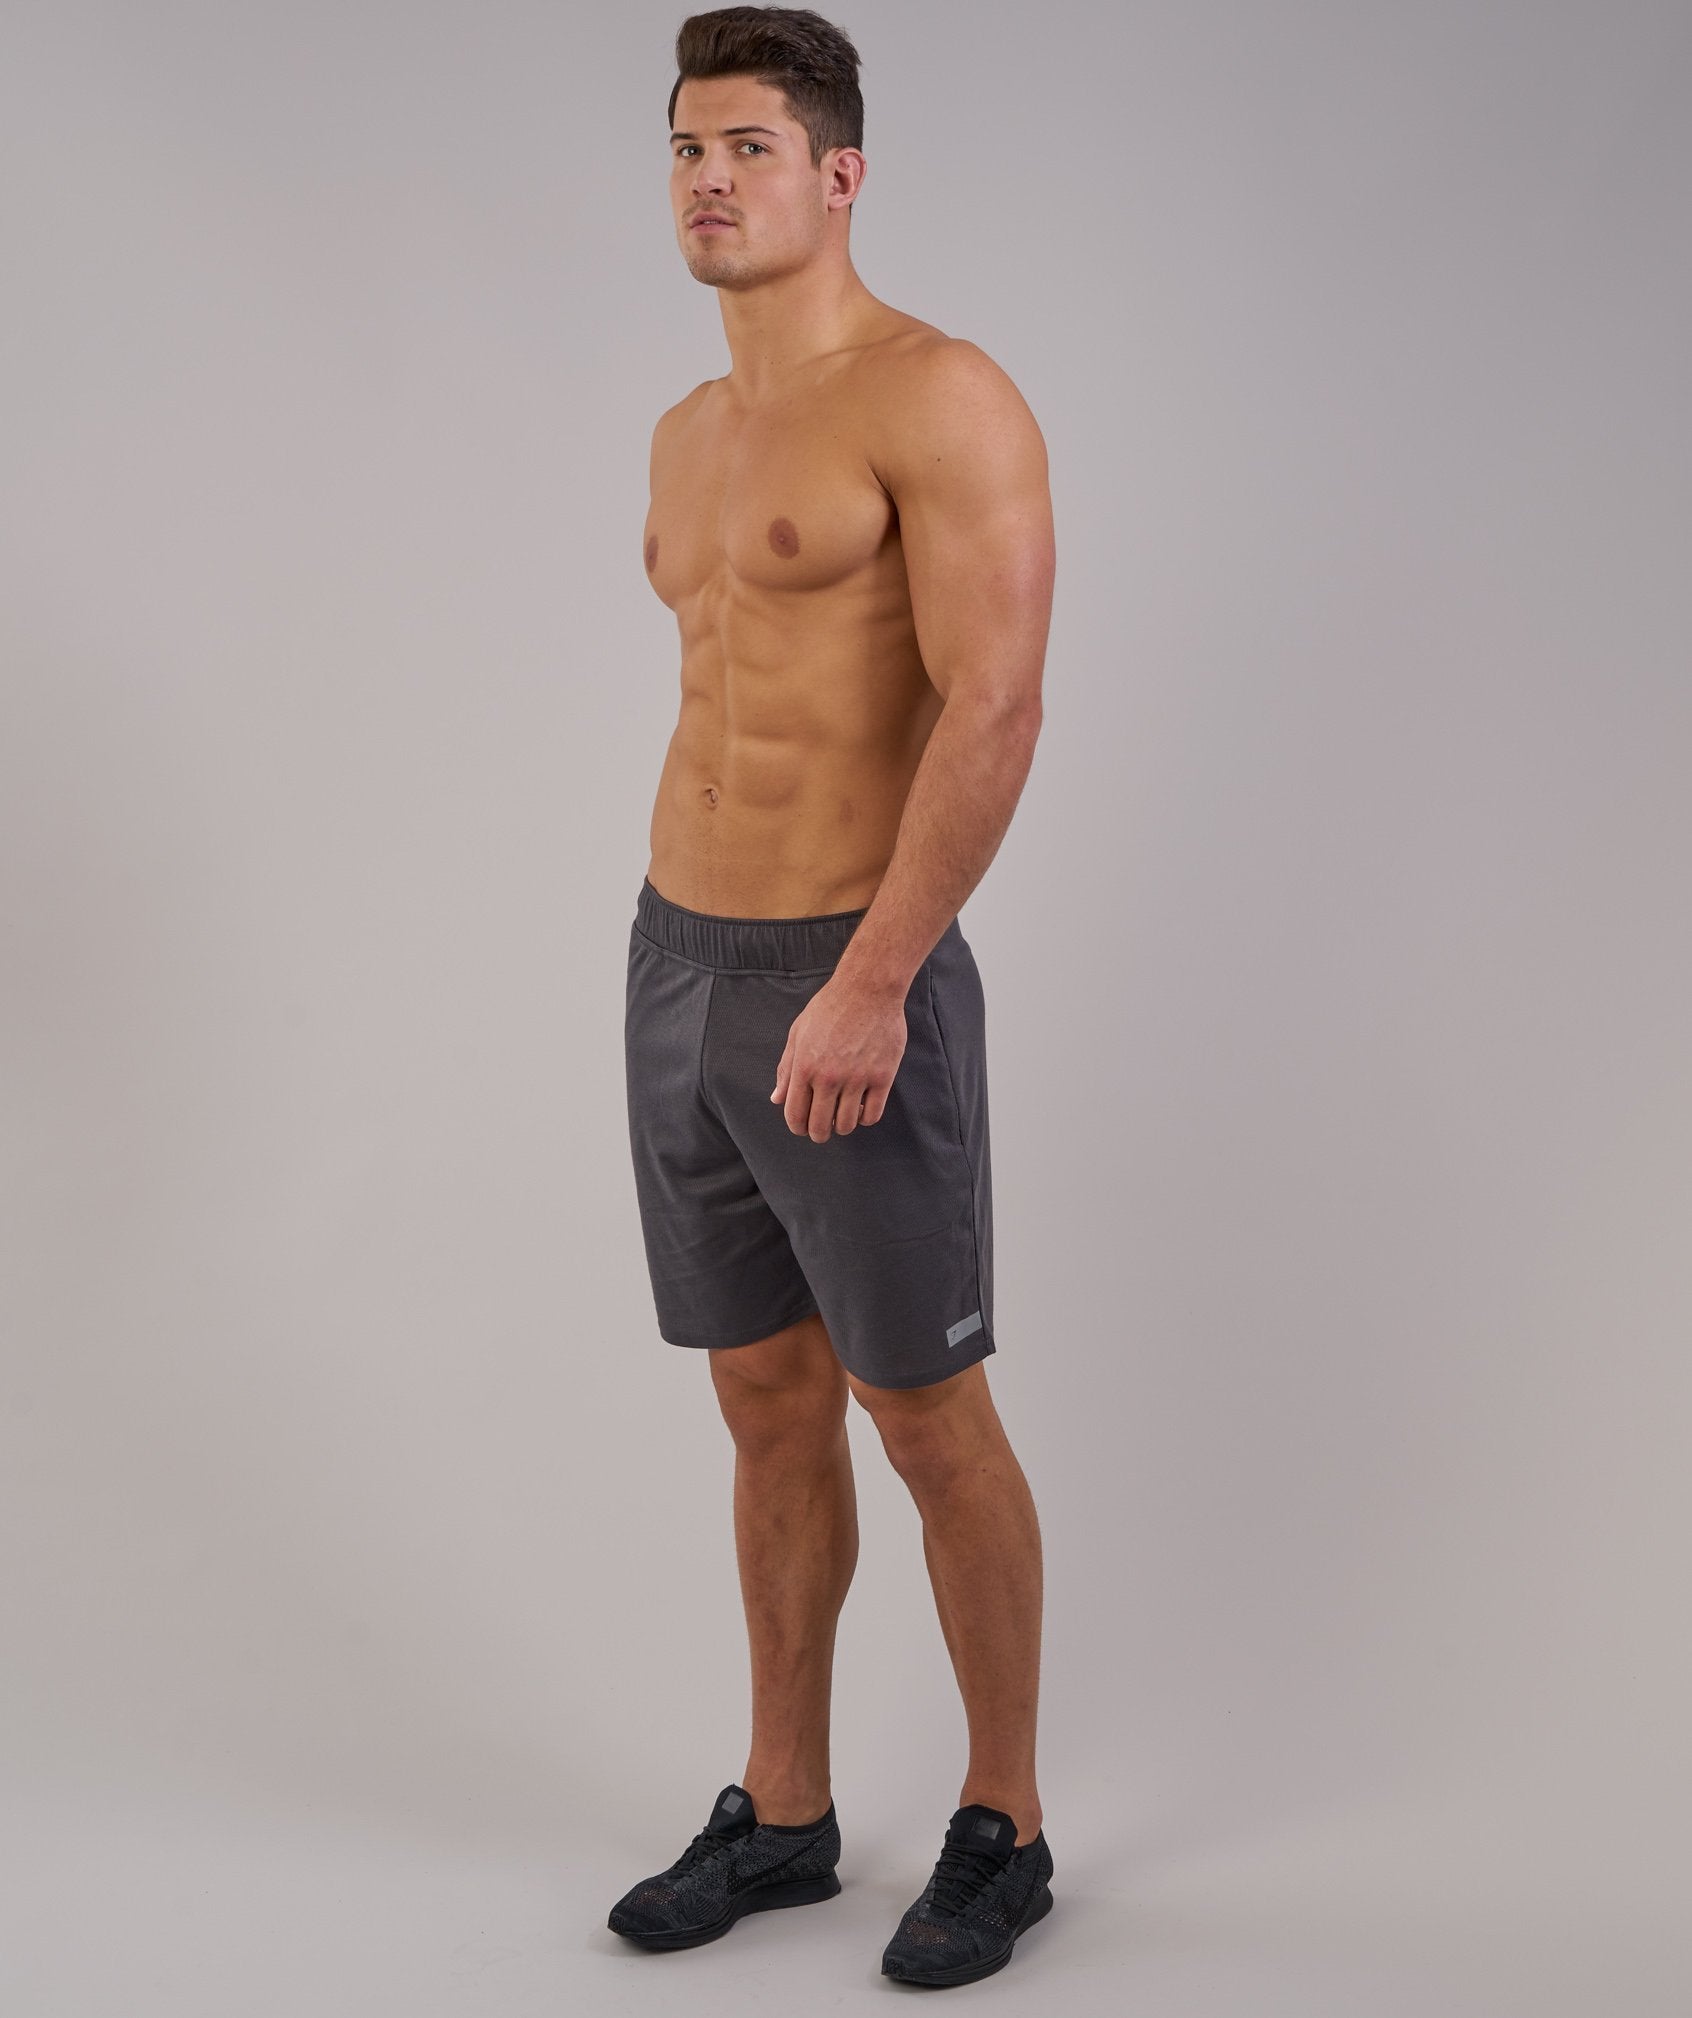 Free Flow Shorts in Charcoal - view 4